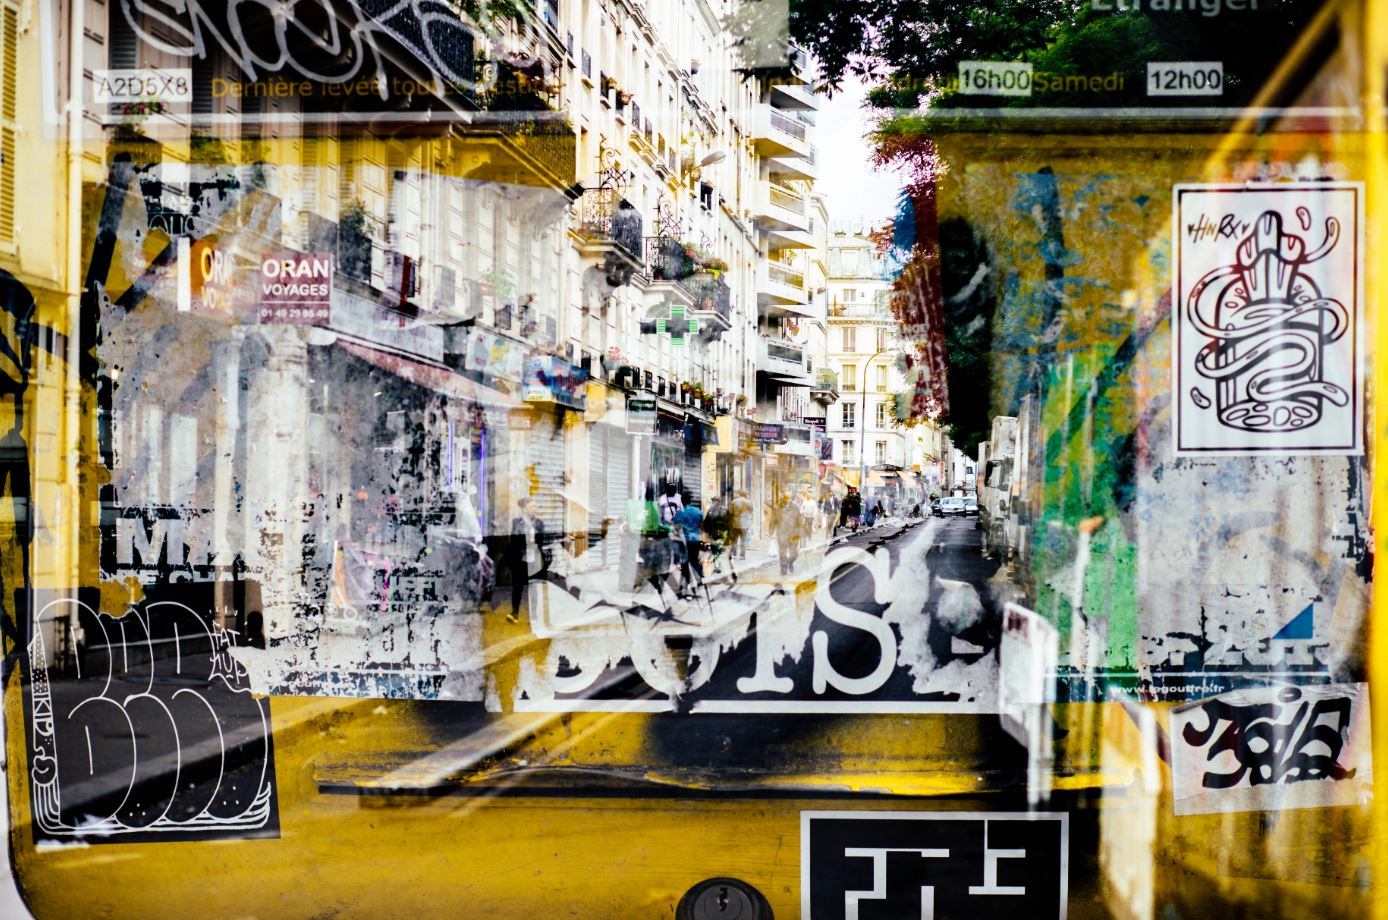 A double exposure photo of a city street and wall